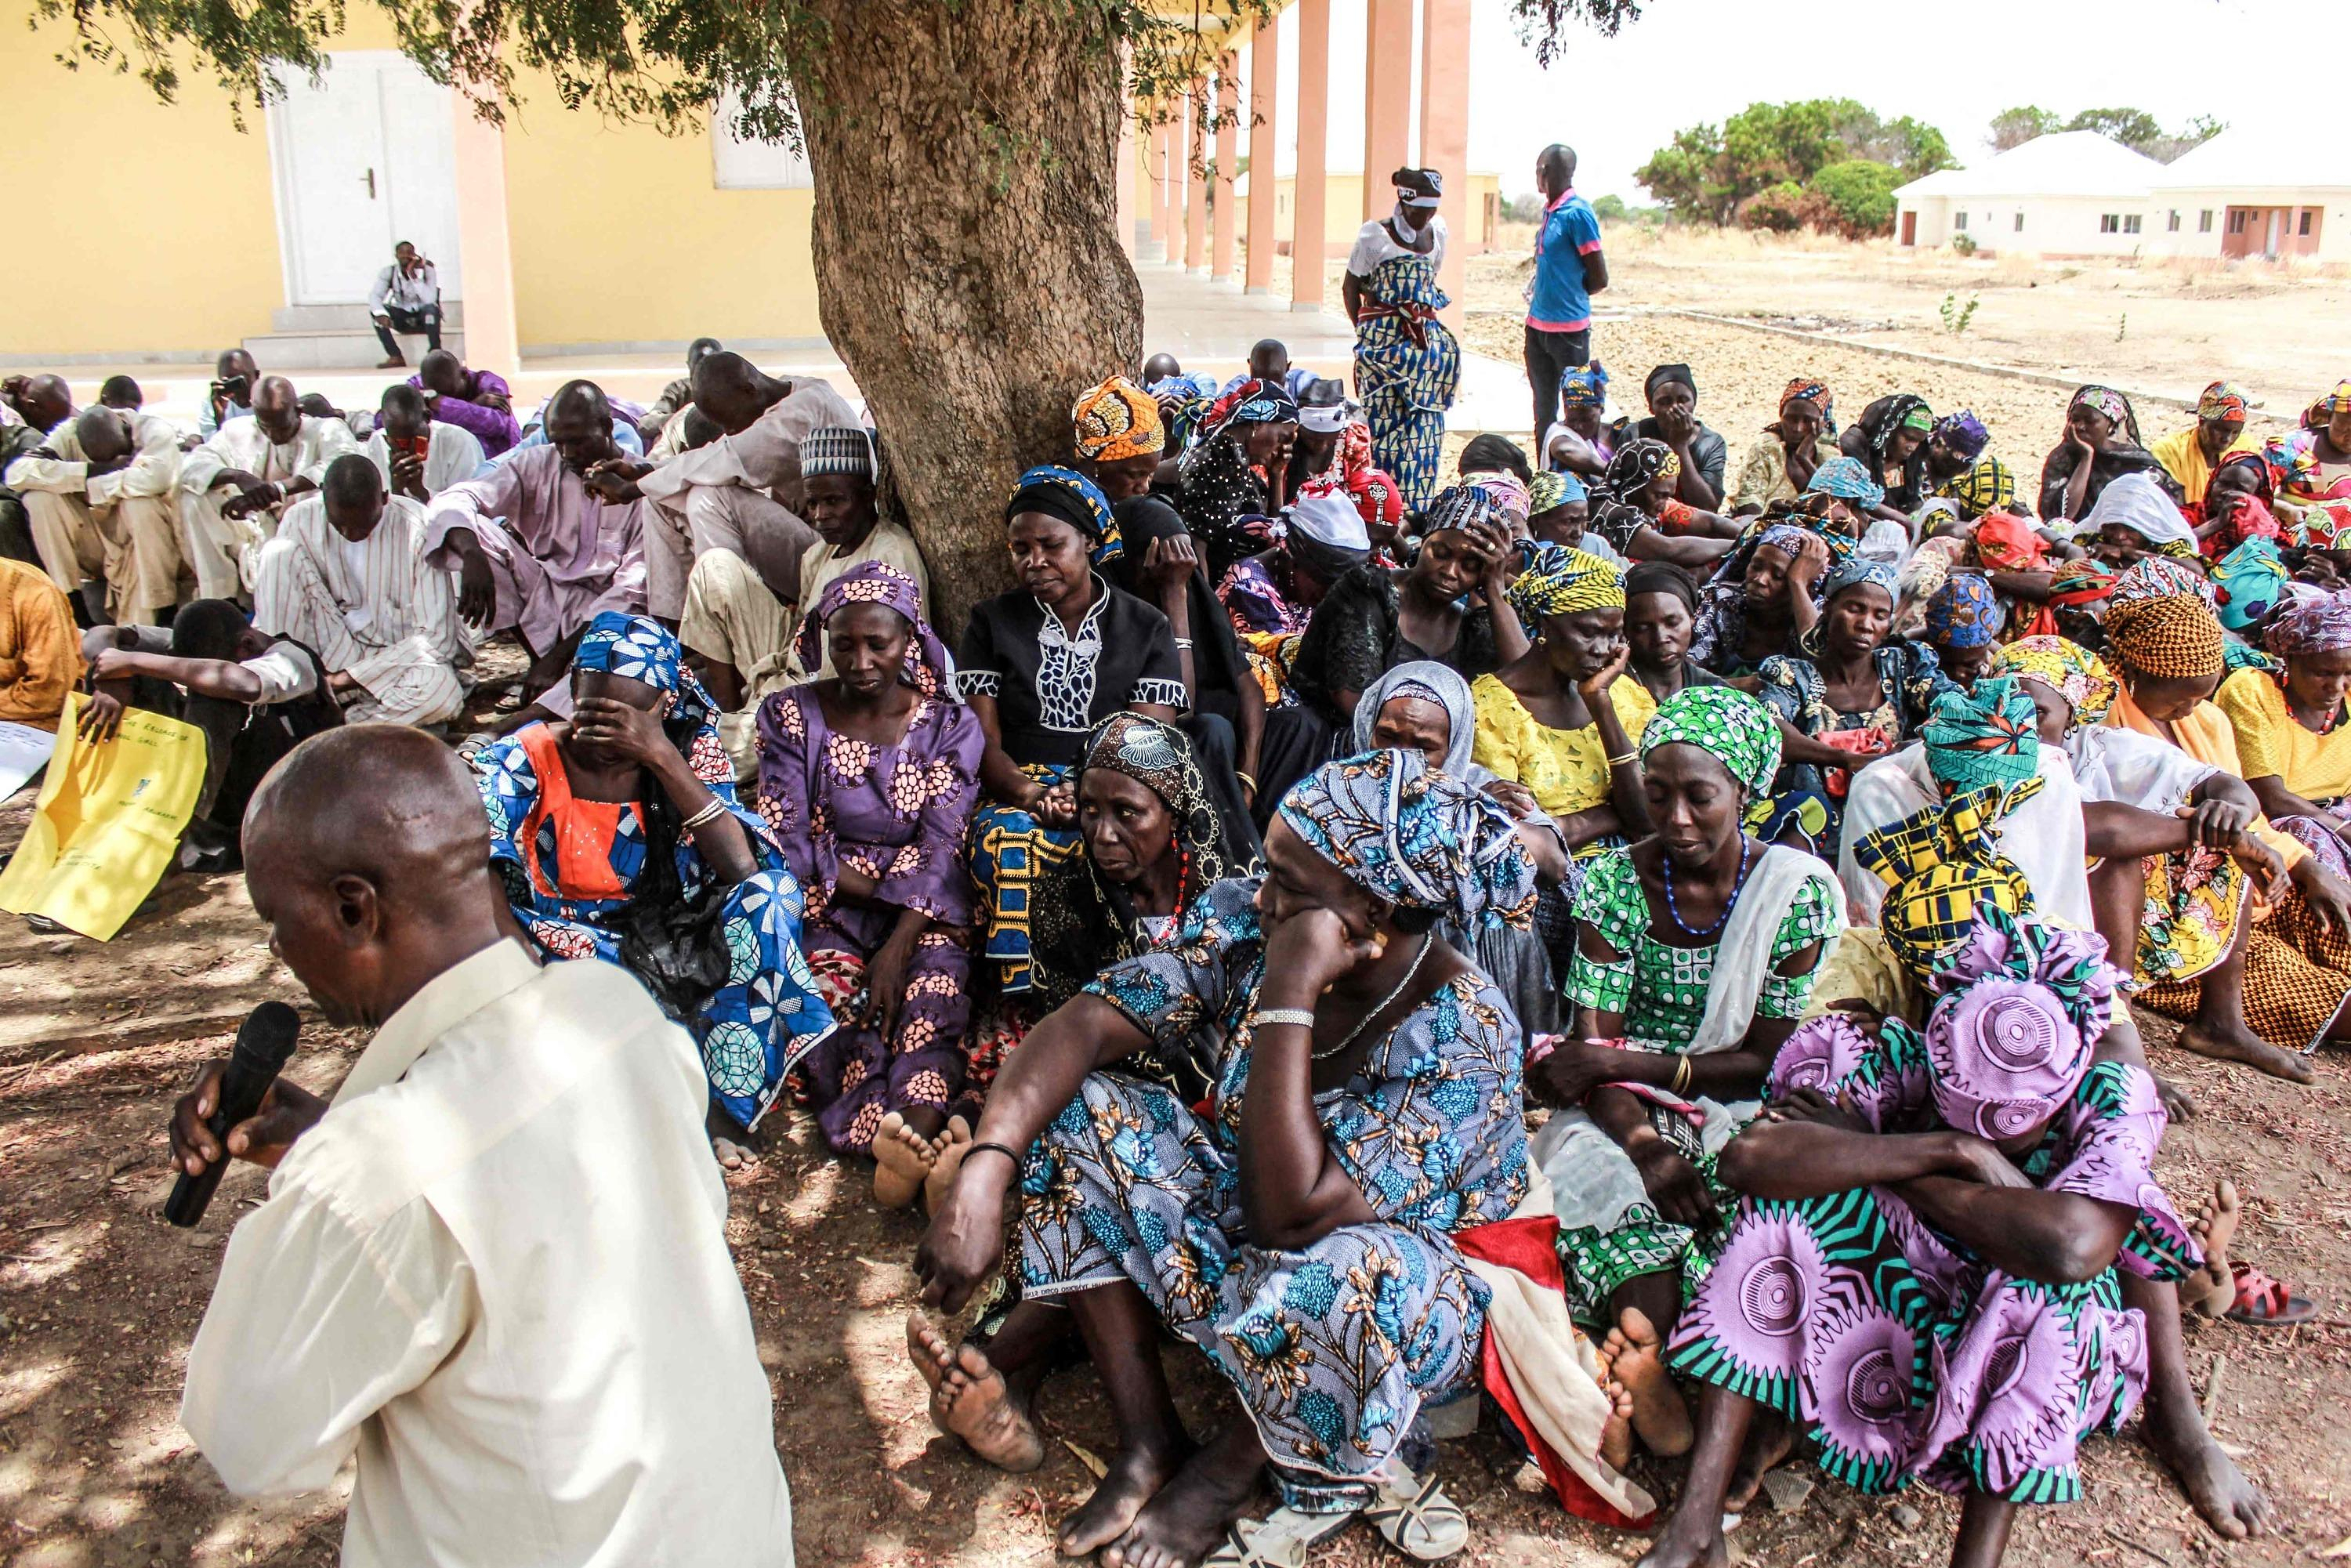 Nigeria: between stigmatization and rejection, the difficult daily life of ex-hostages rescued from Boko Haram